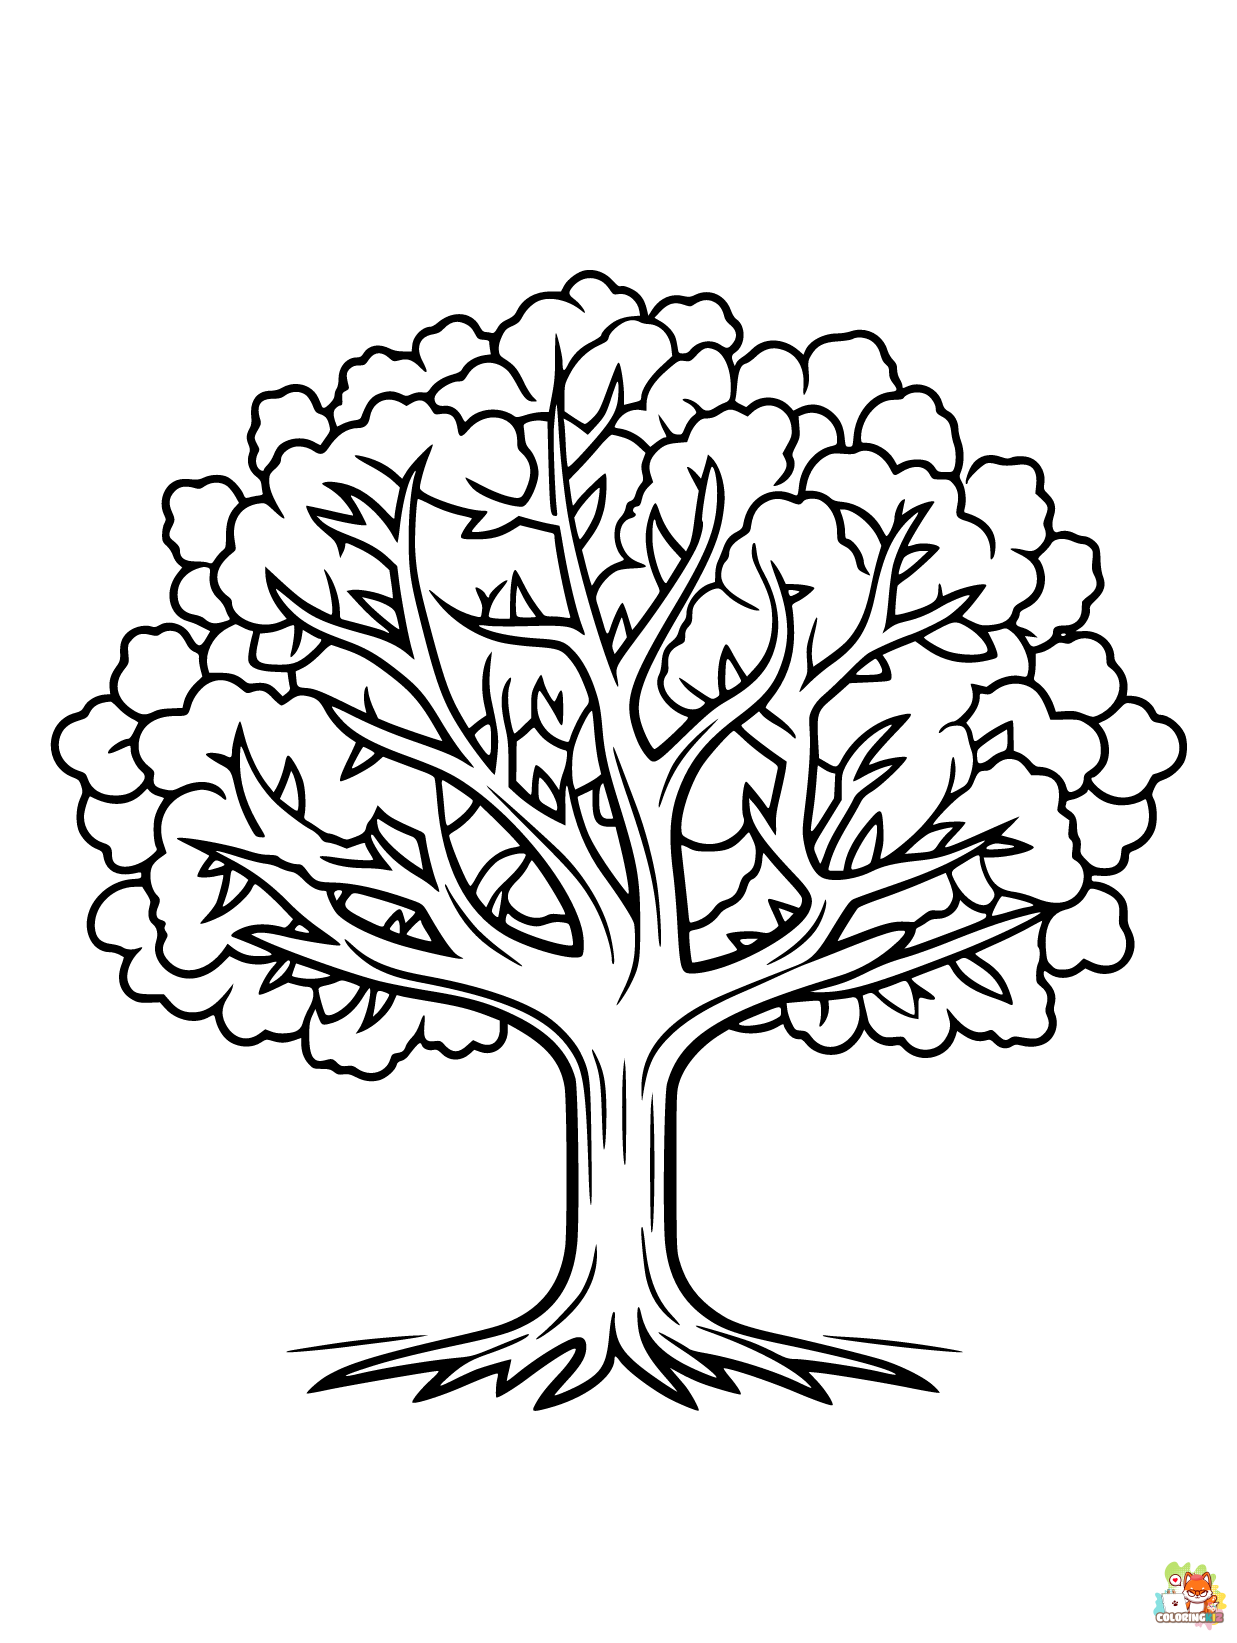 Tree coloring pages free